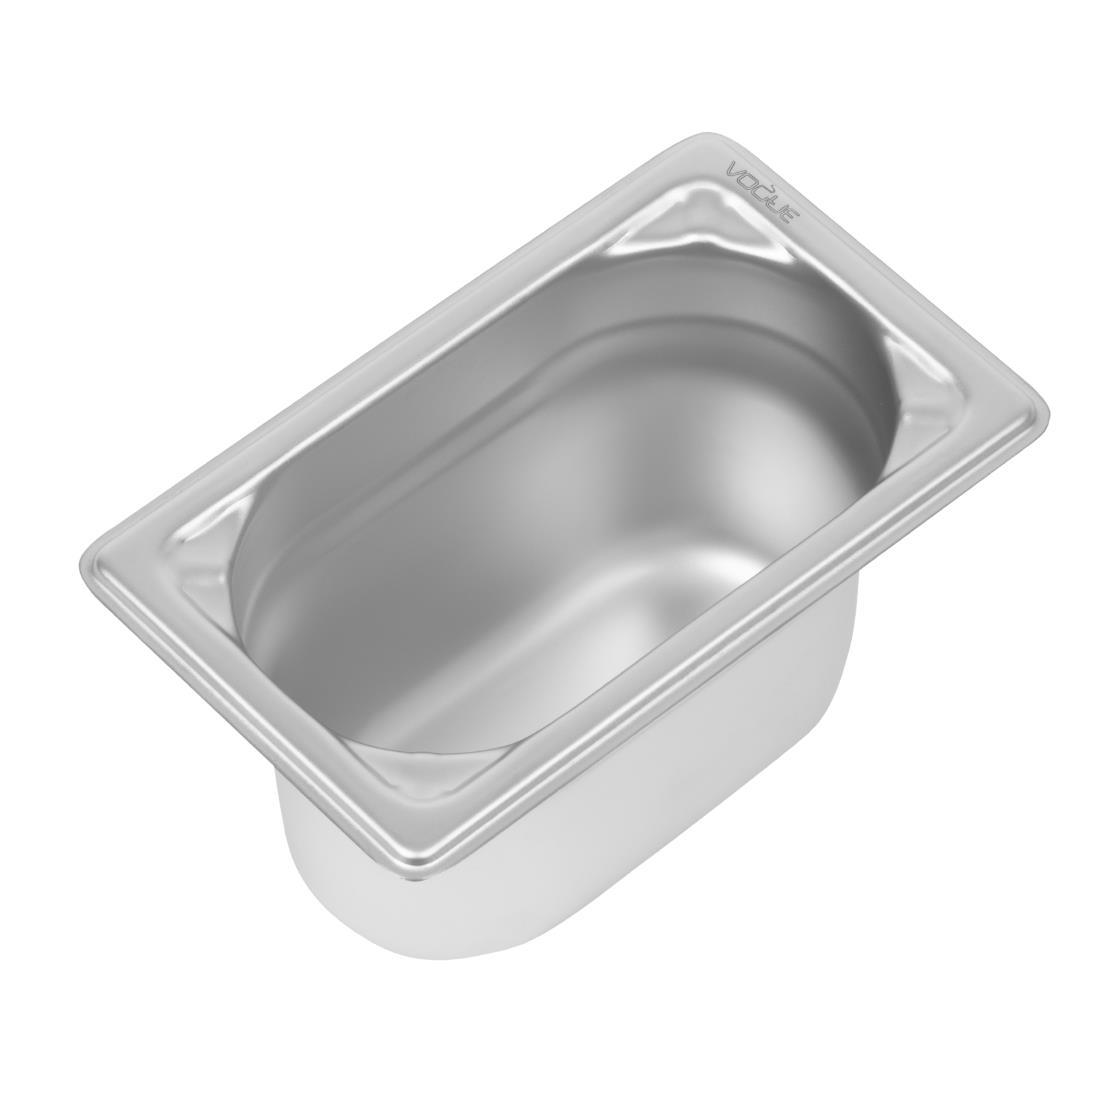 Vogue Heavy Duty Stainless Steel 1/9 Gastronorm Pan 100mm - DW454  - 1